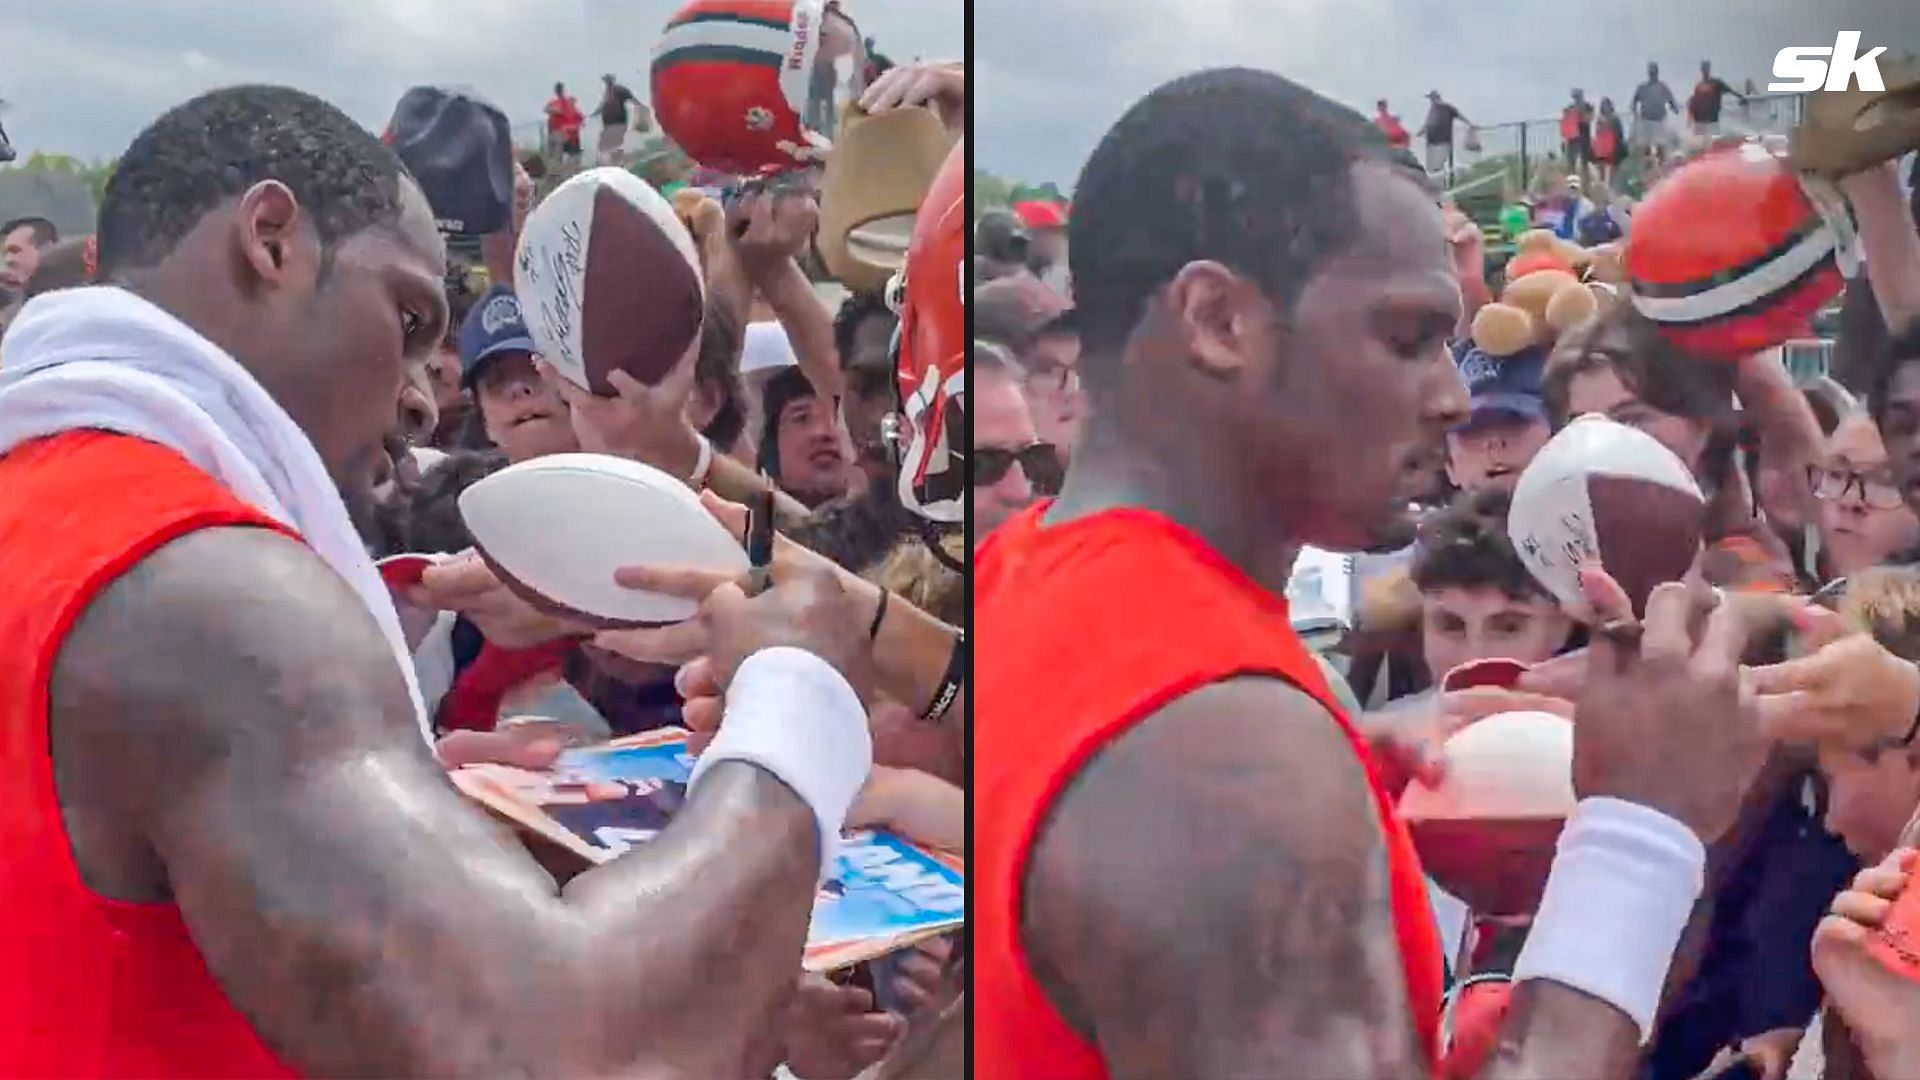 Cleveland Browns QB Deshaun Watson gets mobbed by fans for autographs